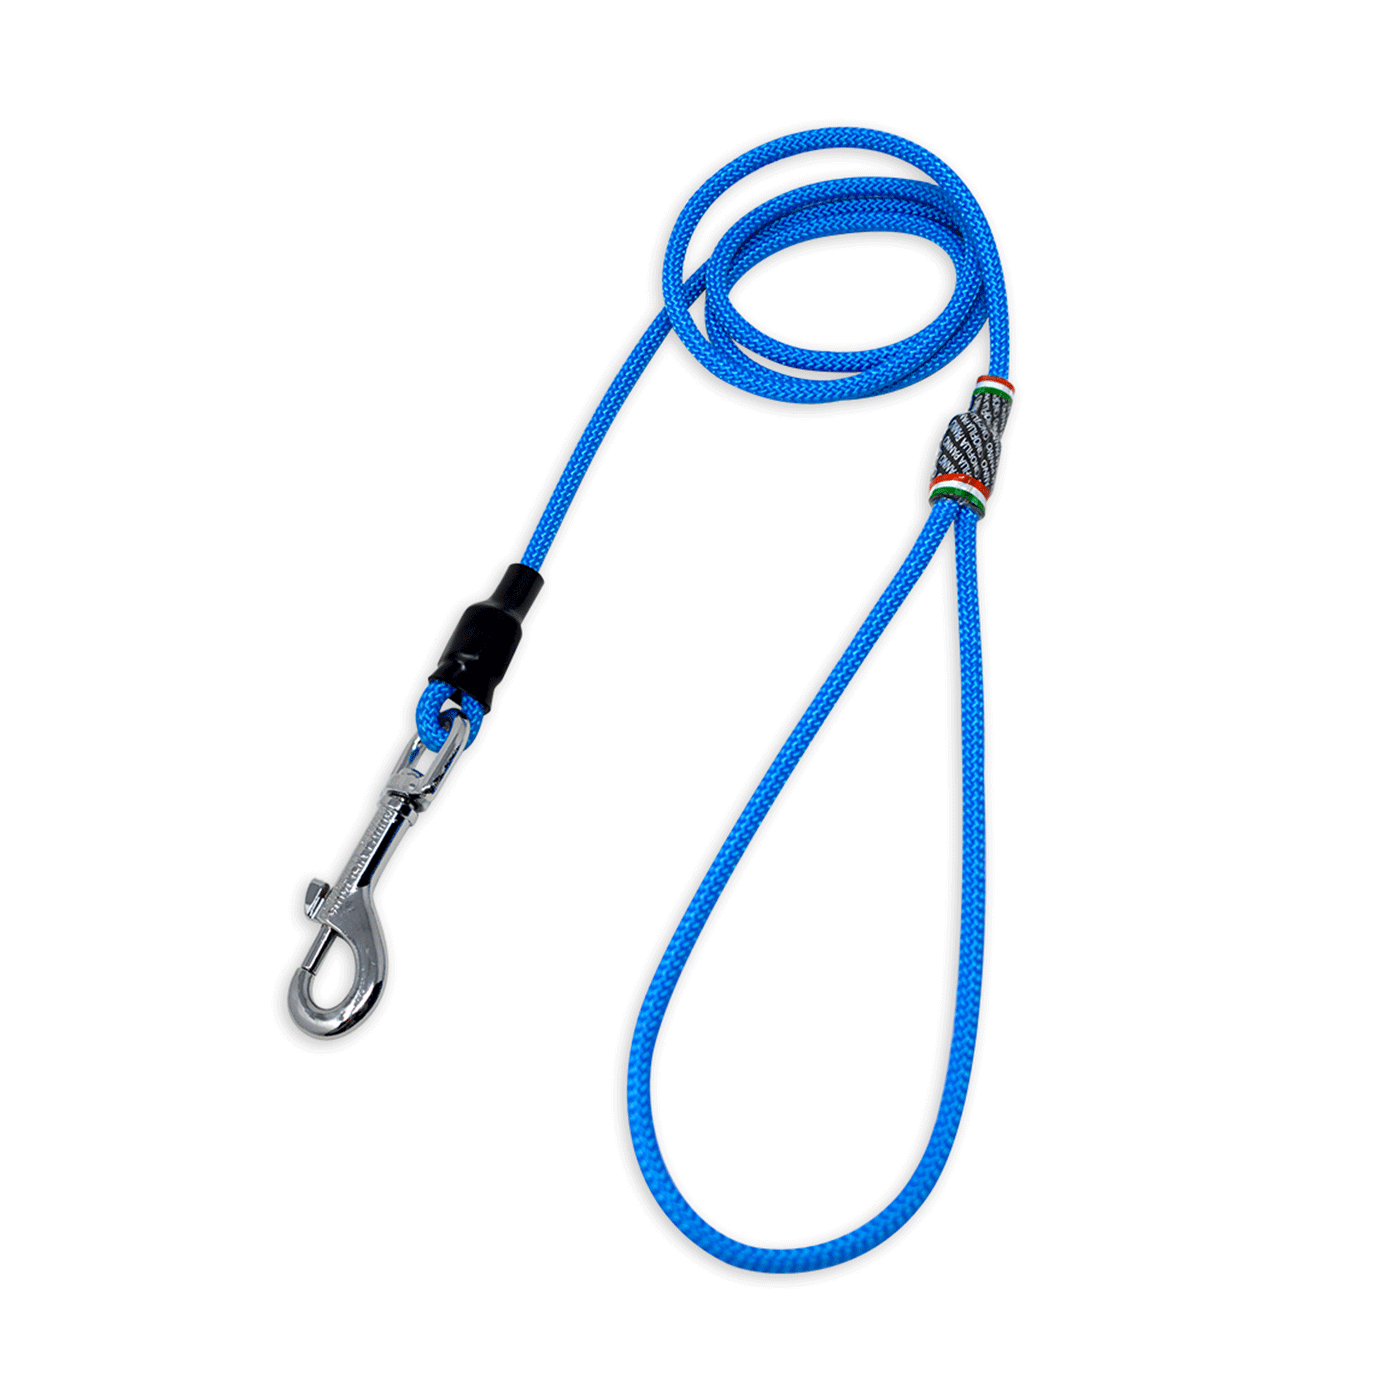 CLASSIC NAUTICAL CORD LEASH WITH CARABINER 130cm (BLUE)